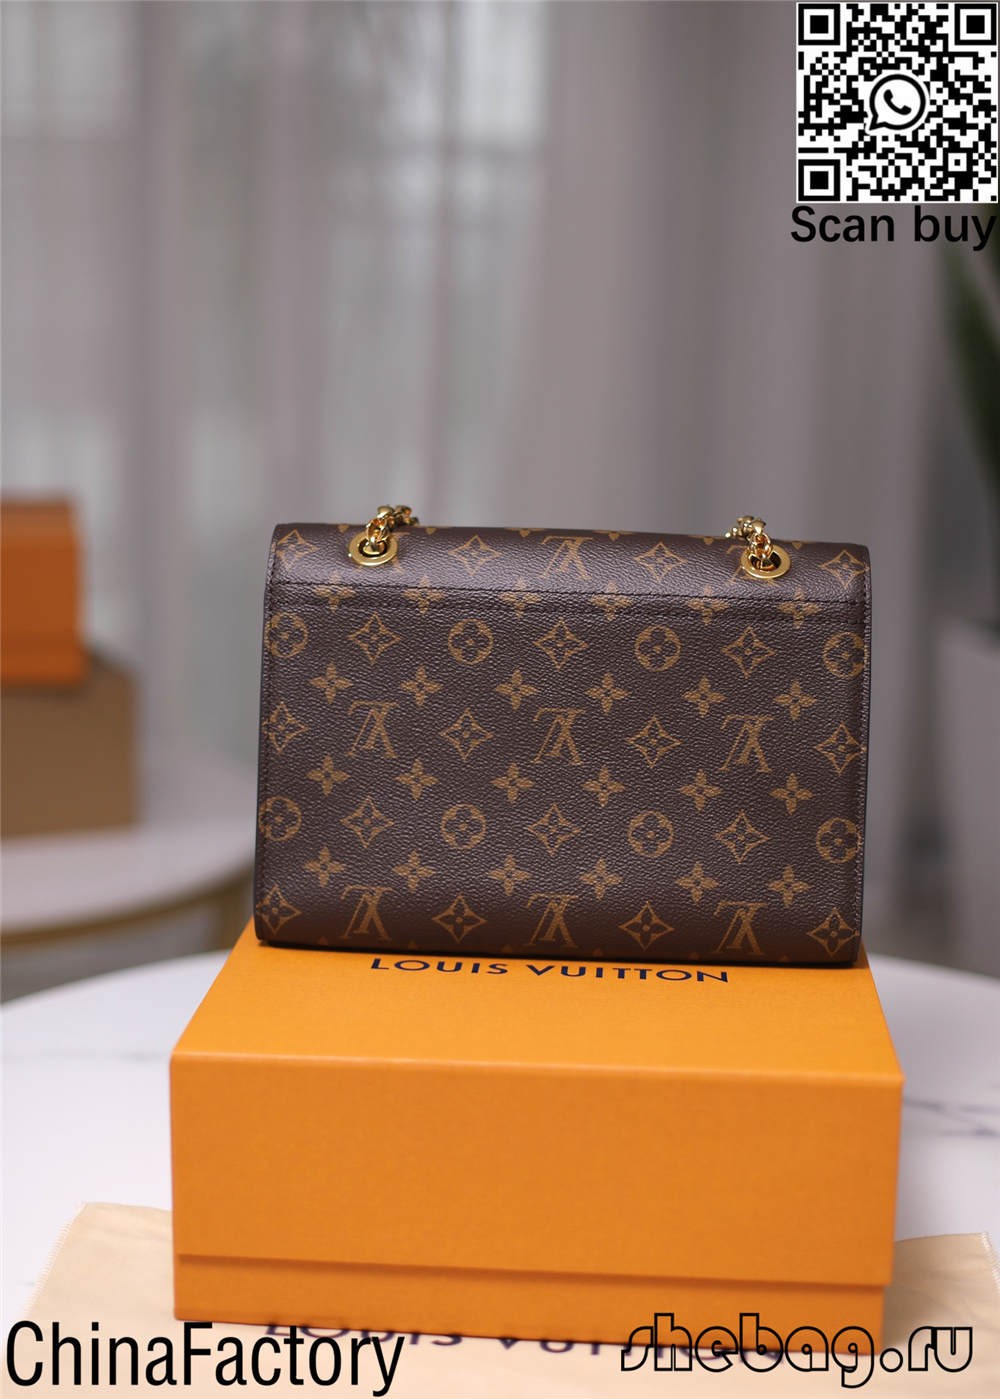 Cheap replica louis vuitton sling bag online shopping (2022 new edition)-Best Quality Fake Louis Vuitton Bag Online Store, Replica designer bag ru